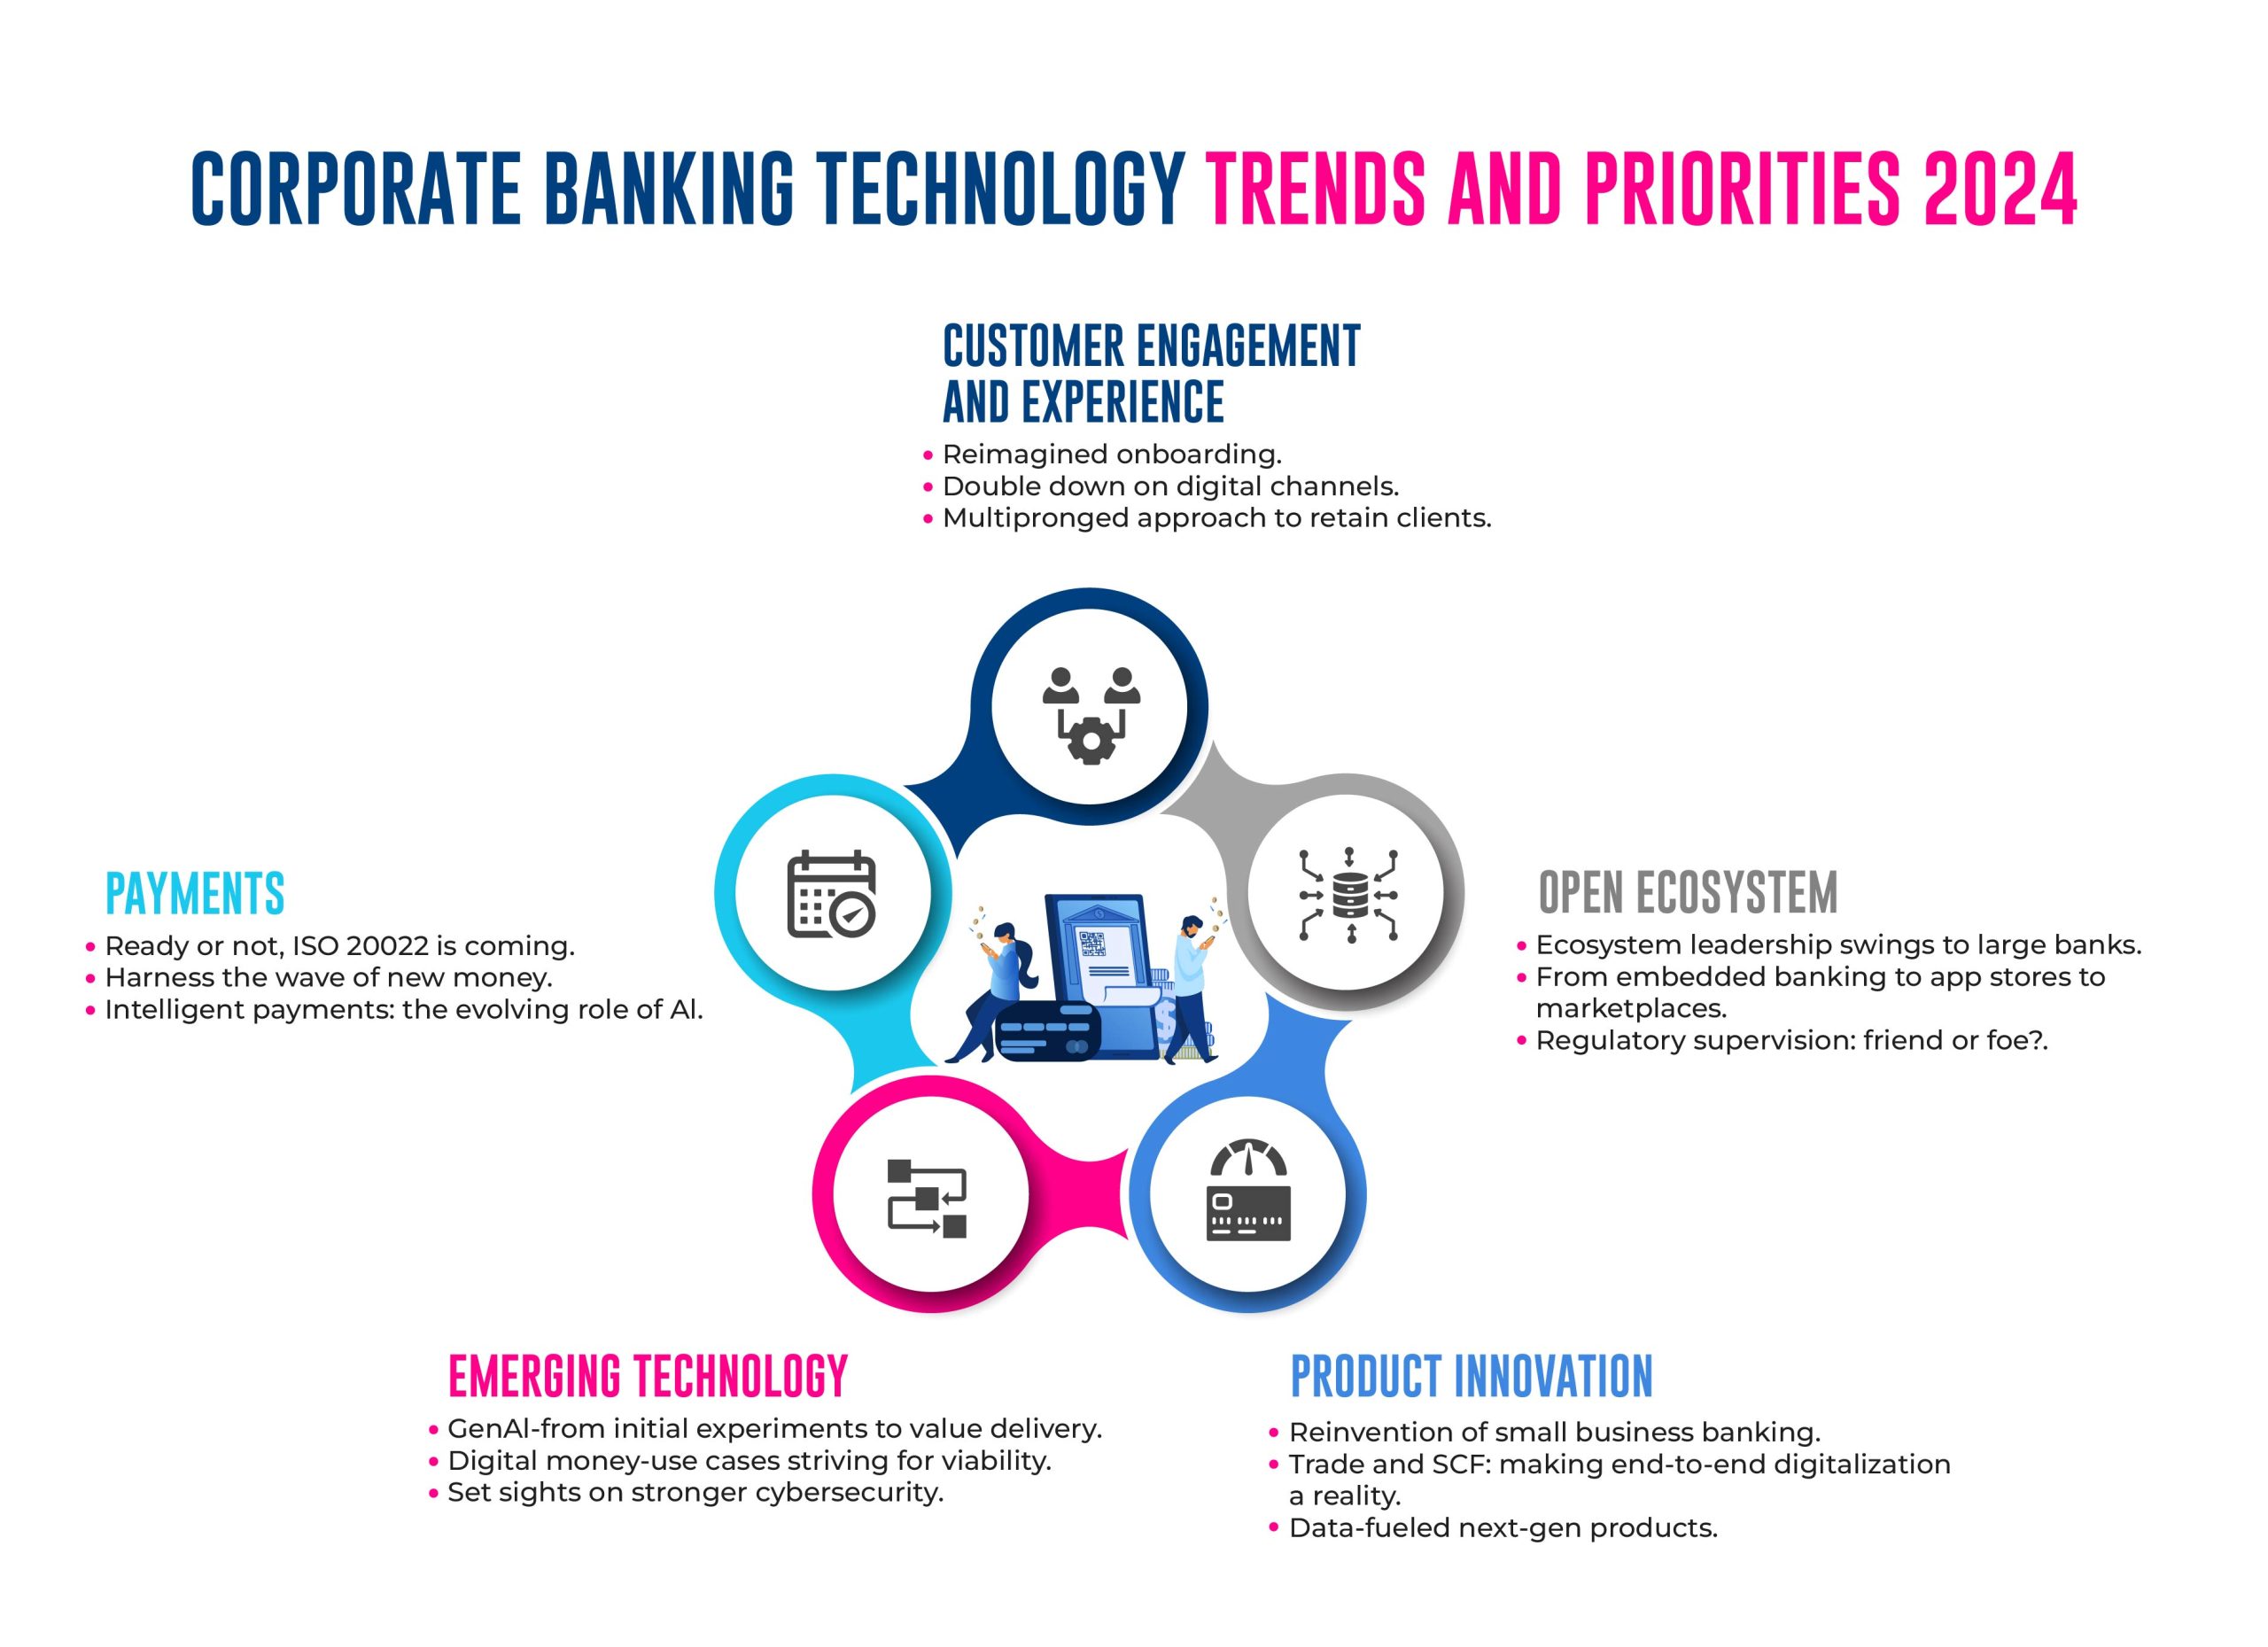 technology trends in corporate banking 2024
